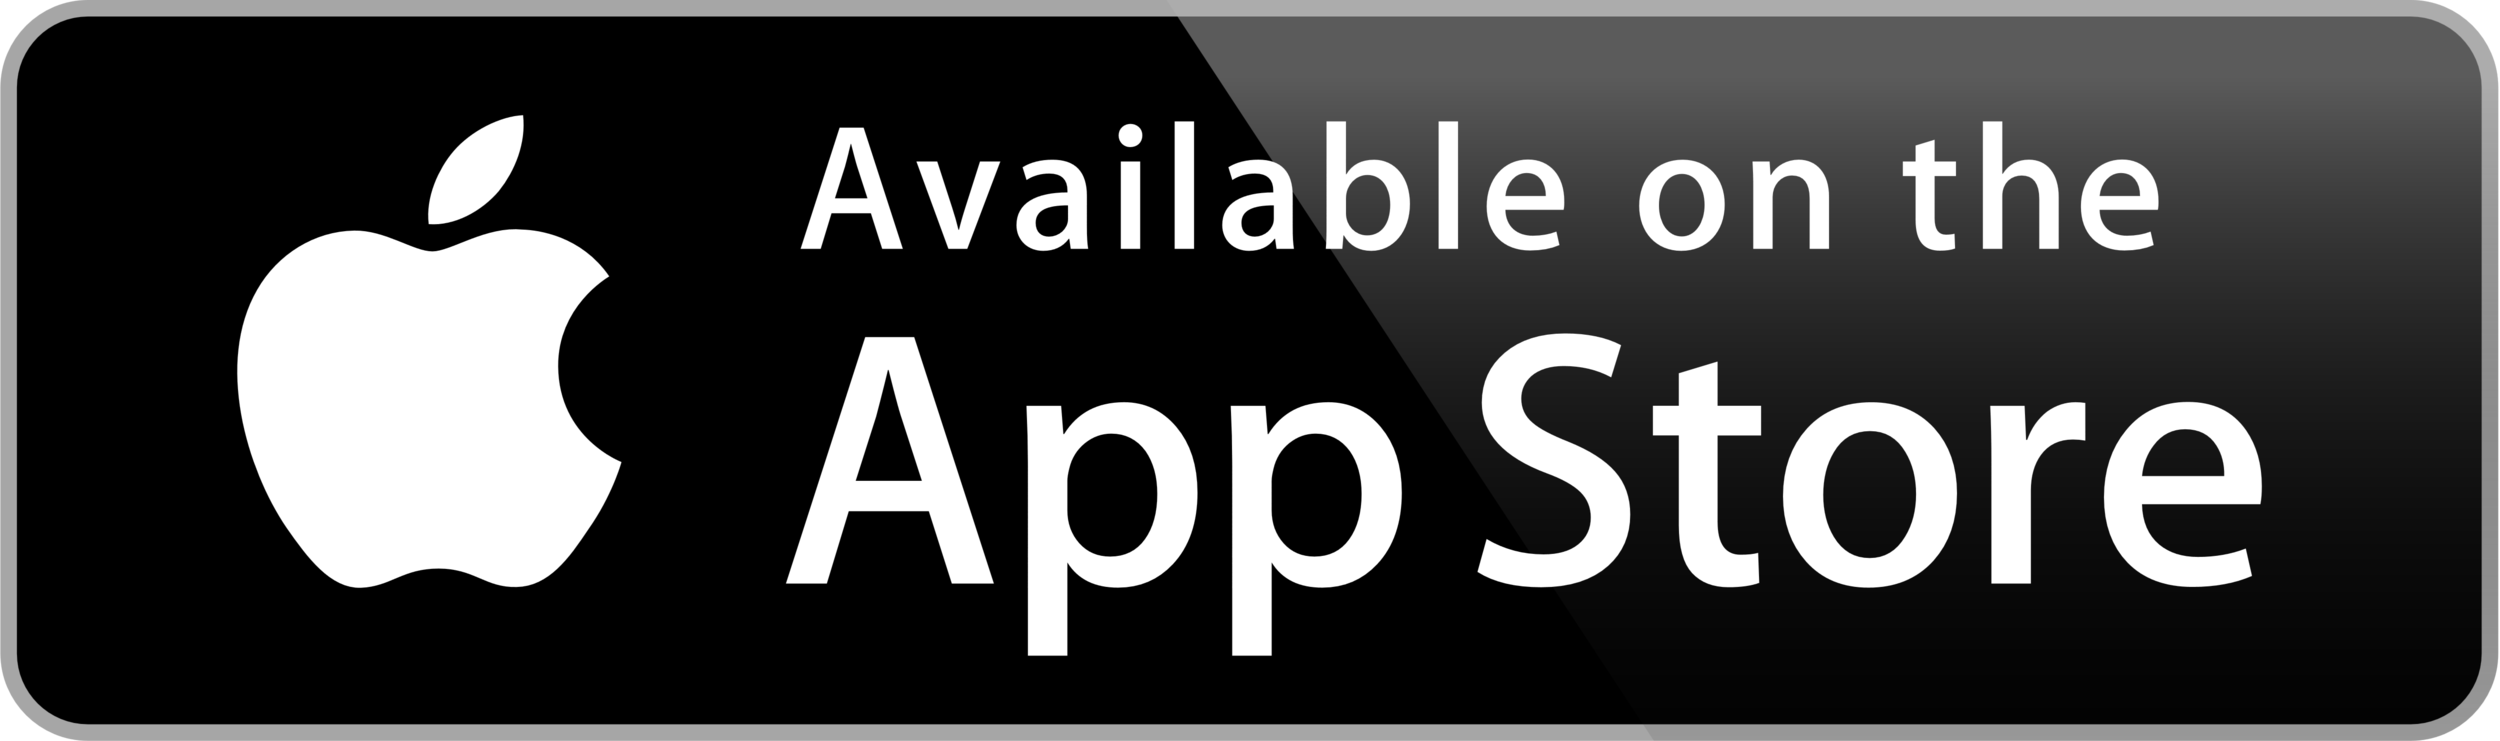 GGAvailable_on_the_App_Store_logo.png